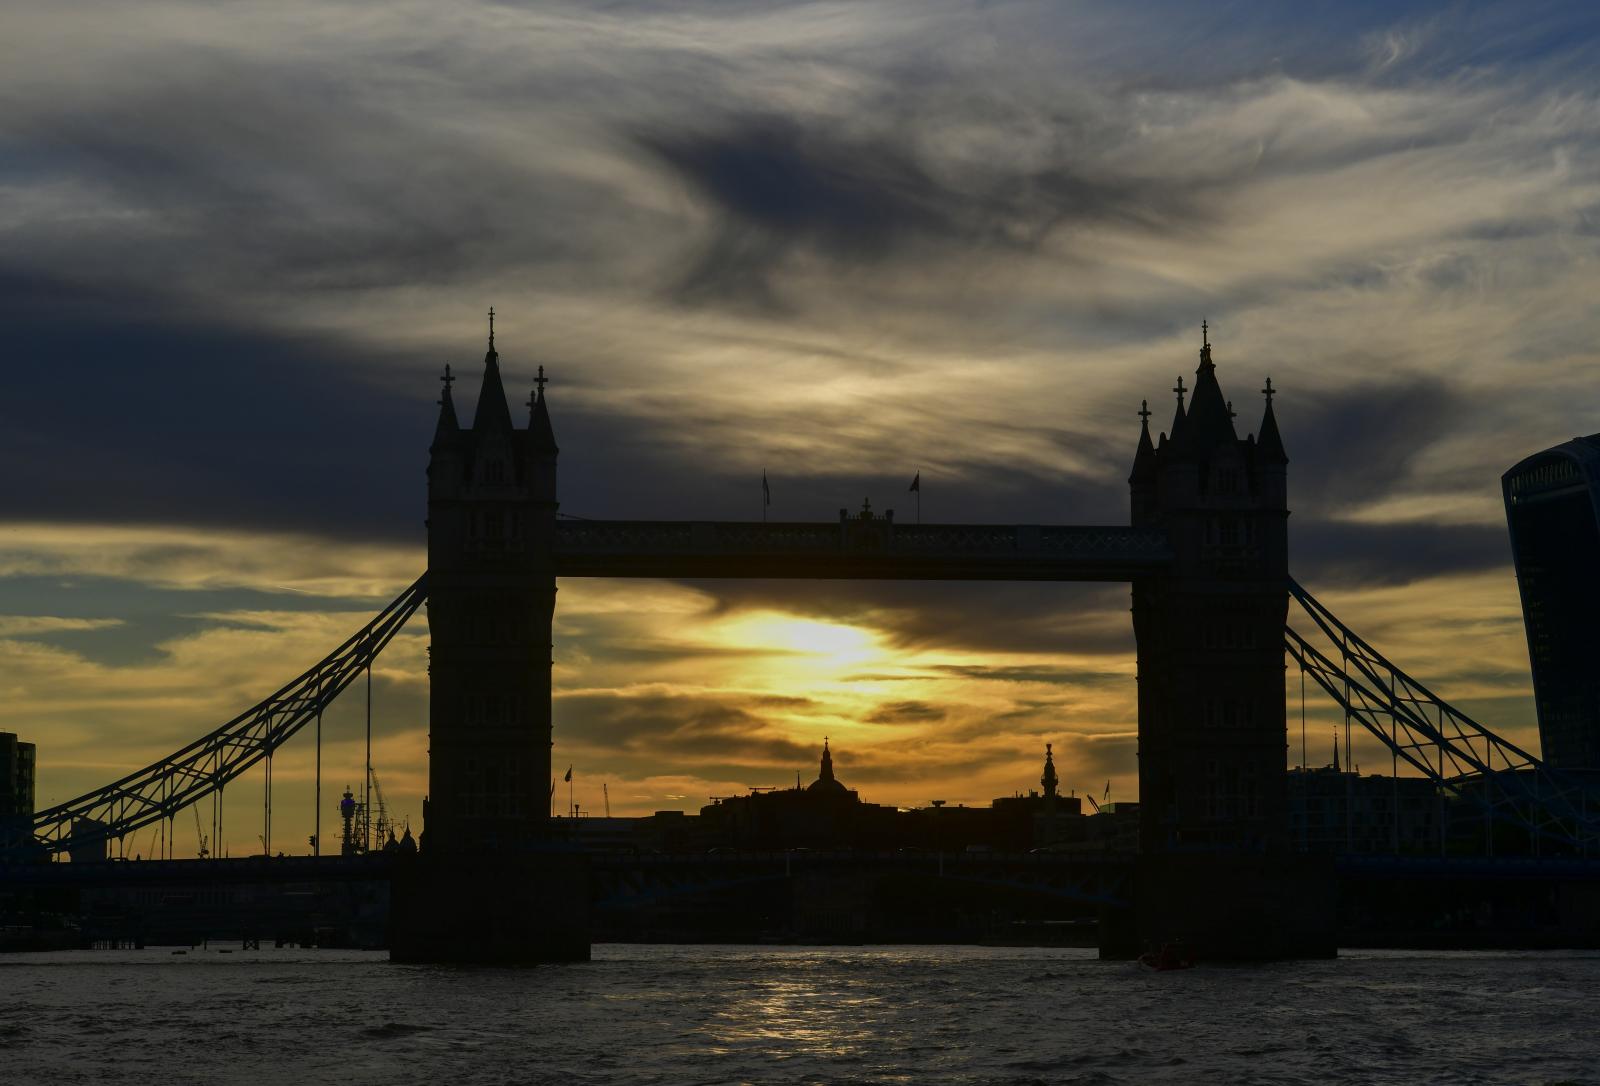 Image from Daily Life UK - Tower Bridge at Sunset in London